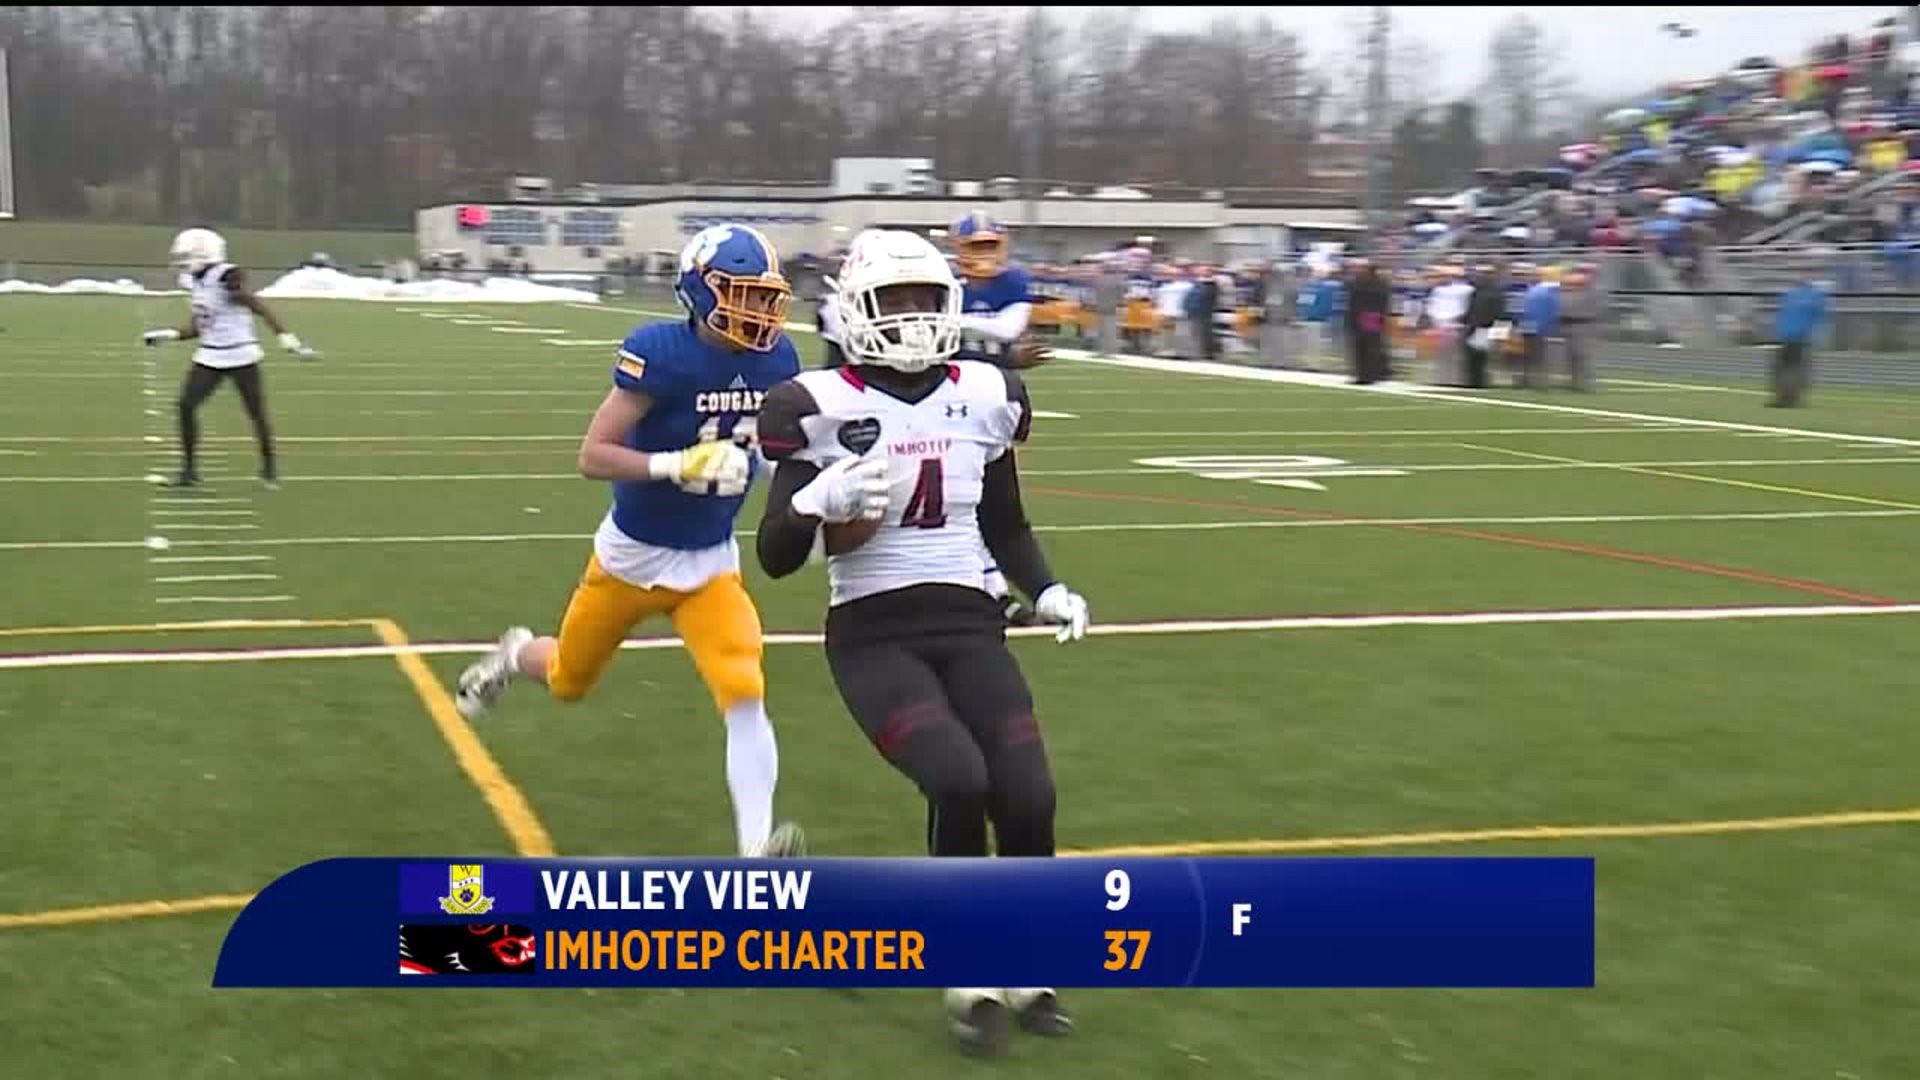 Valley View vs Imhotep Charter football